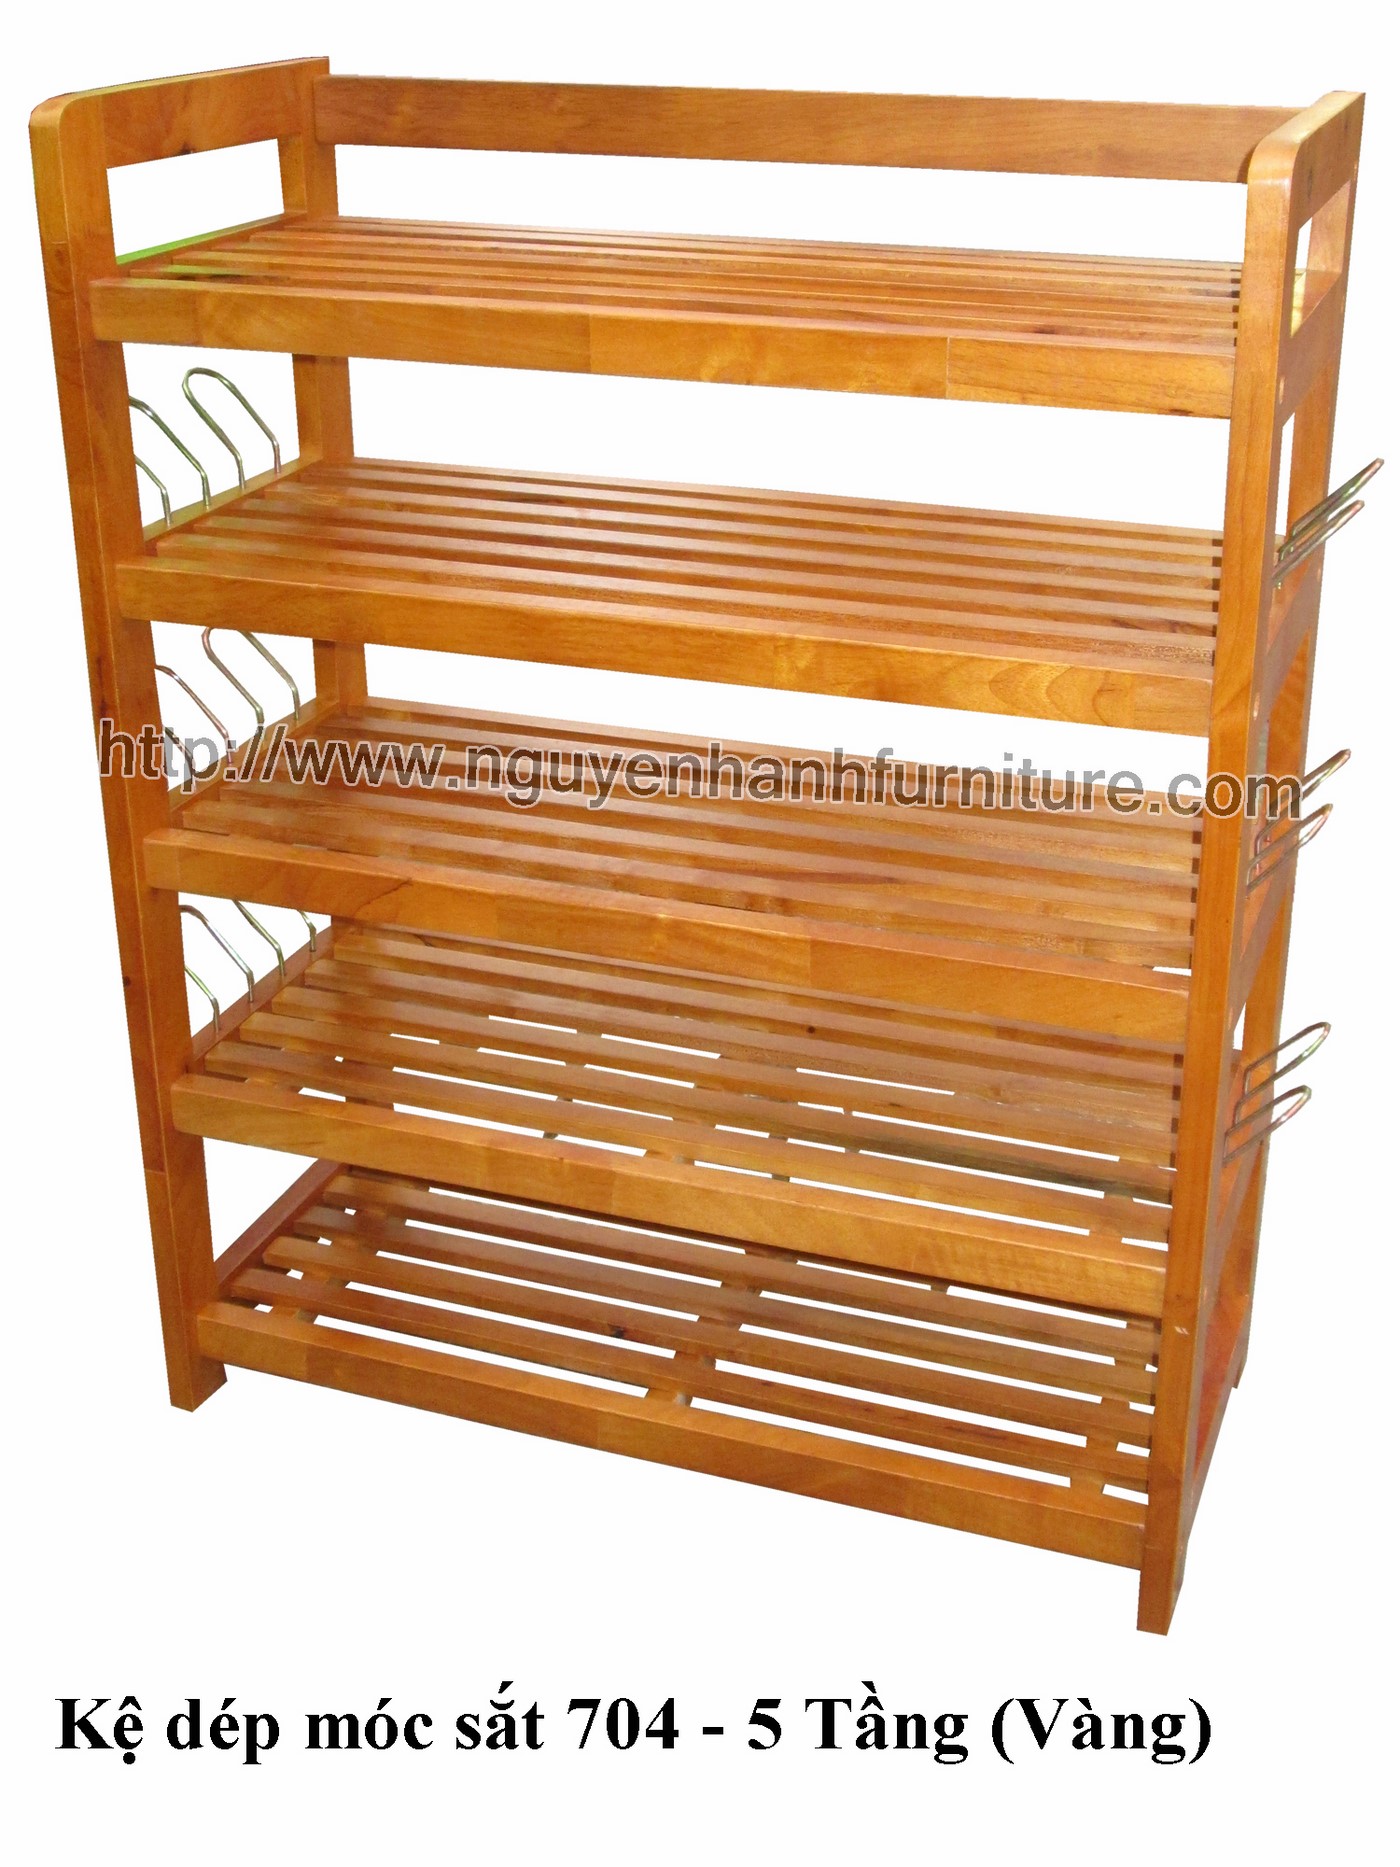 Name product: Shoeshelf with iron hooks 704 - (Yellow) - Dimensions: 63 x 30 x 79 (H) - Description: Wood natural rubber